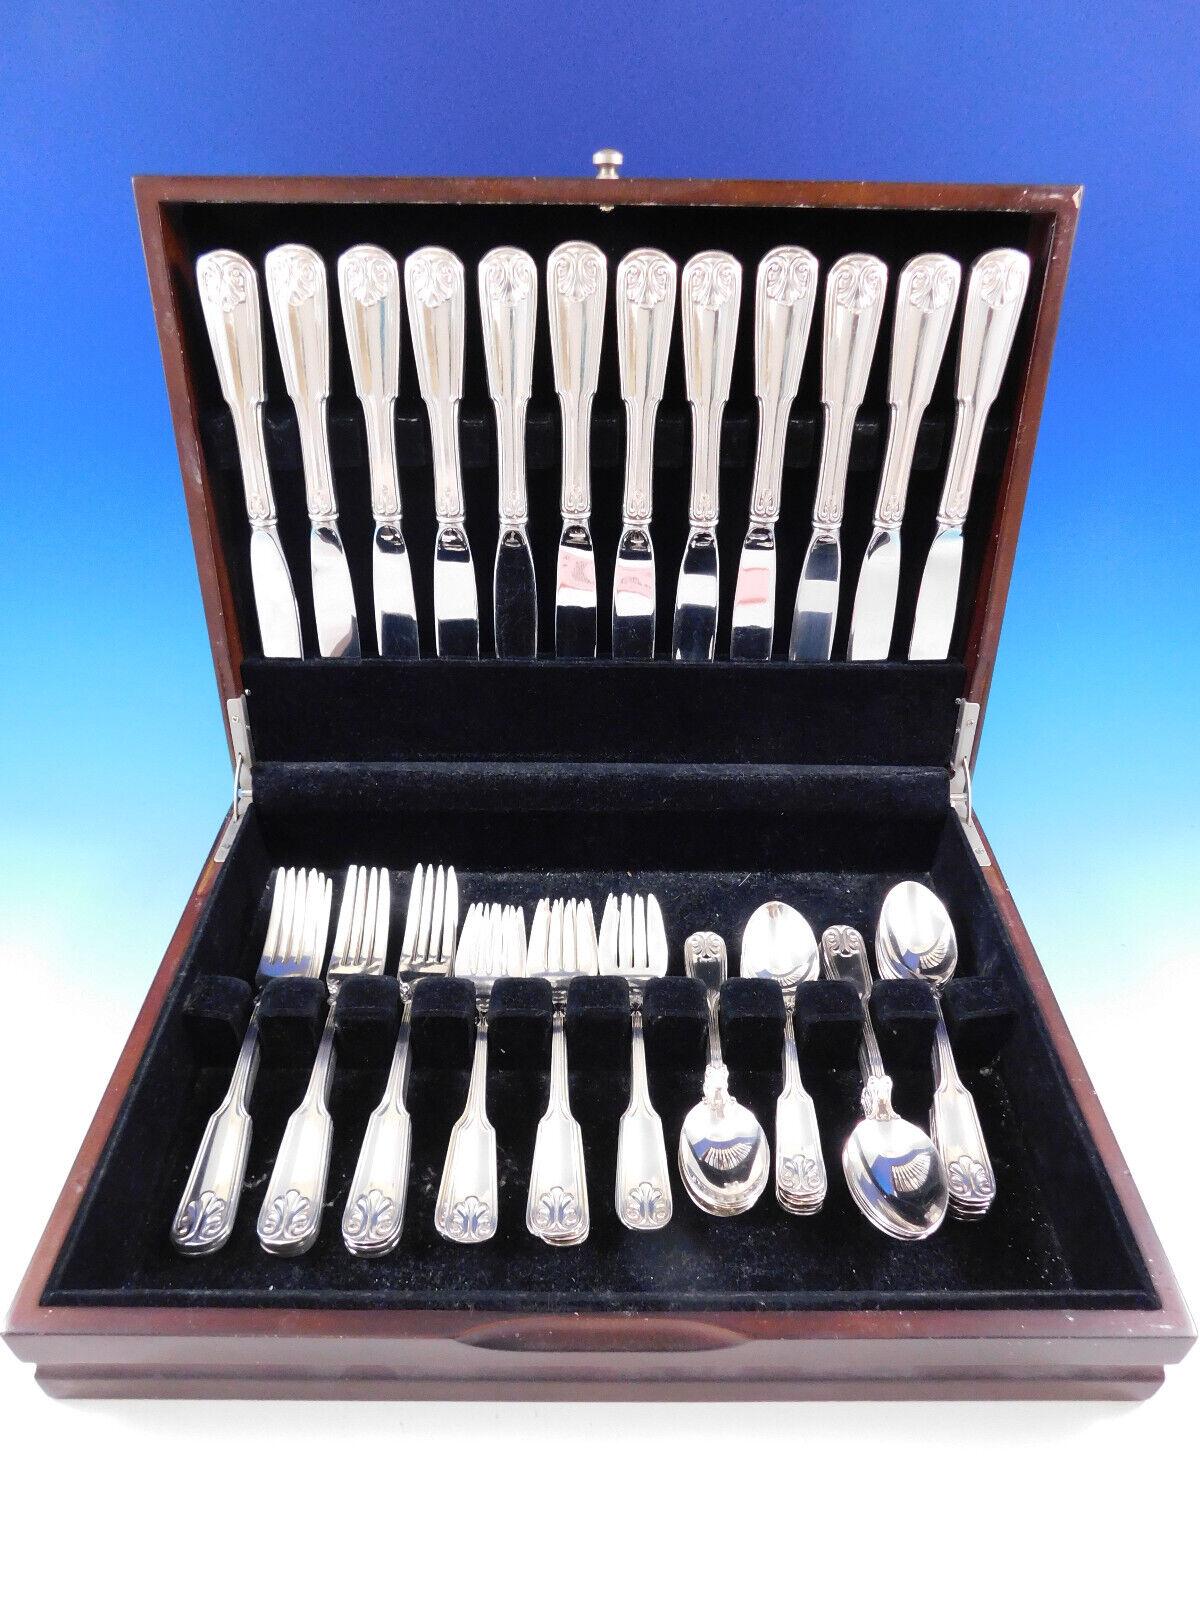 Gorham sterling shell (formerly Hampton 1913) by Gorham sterling silver Flatware set - 60 pieces. This set includes:
12 Knives, 9 1/4